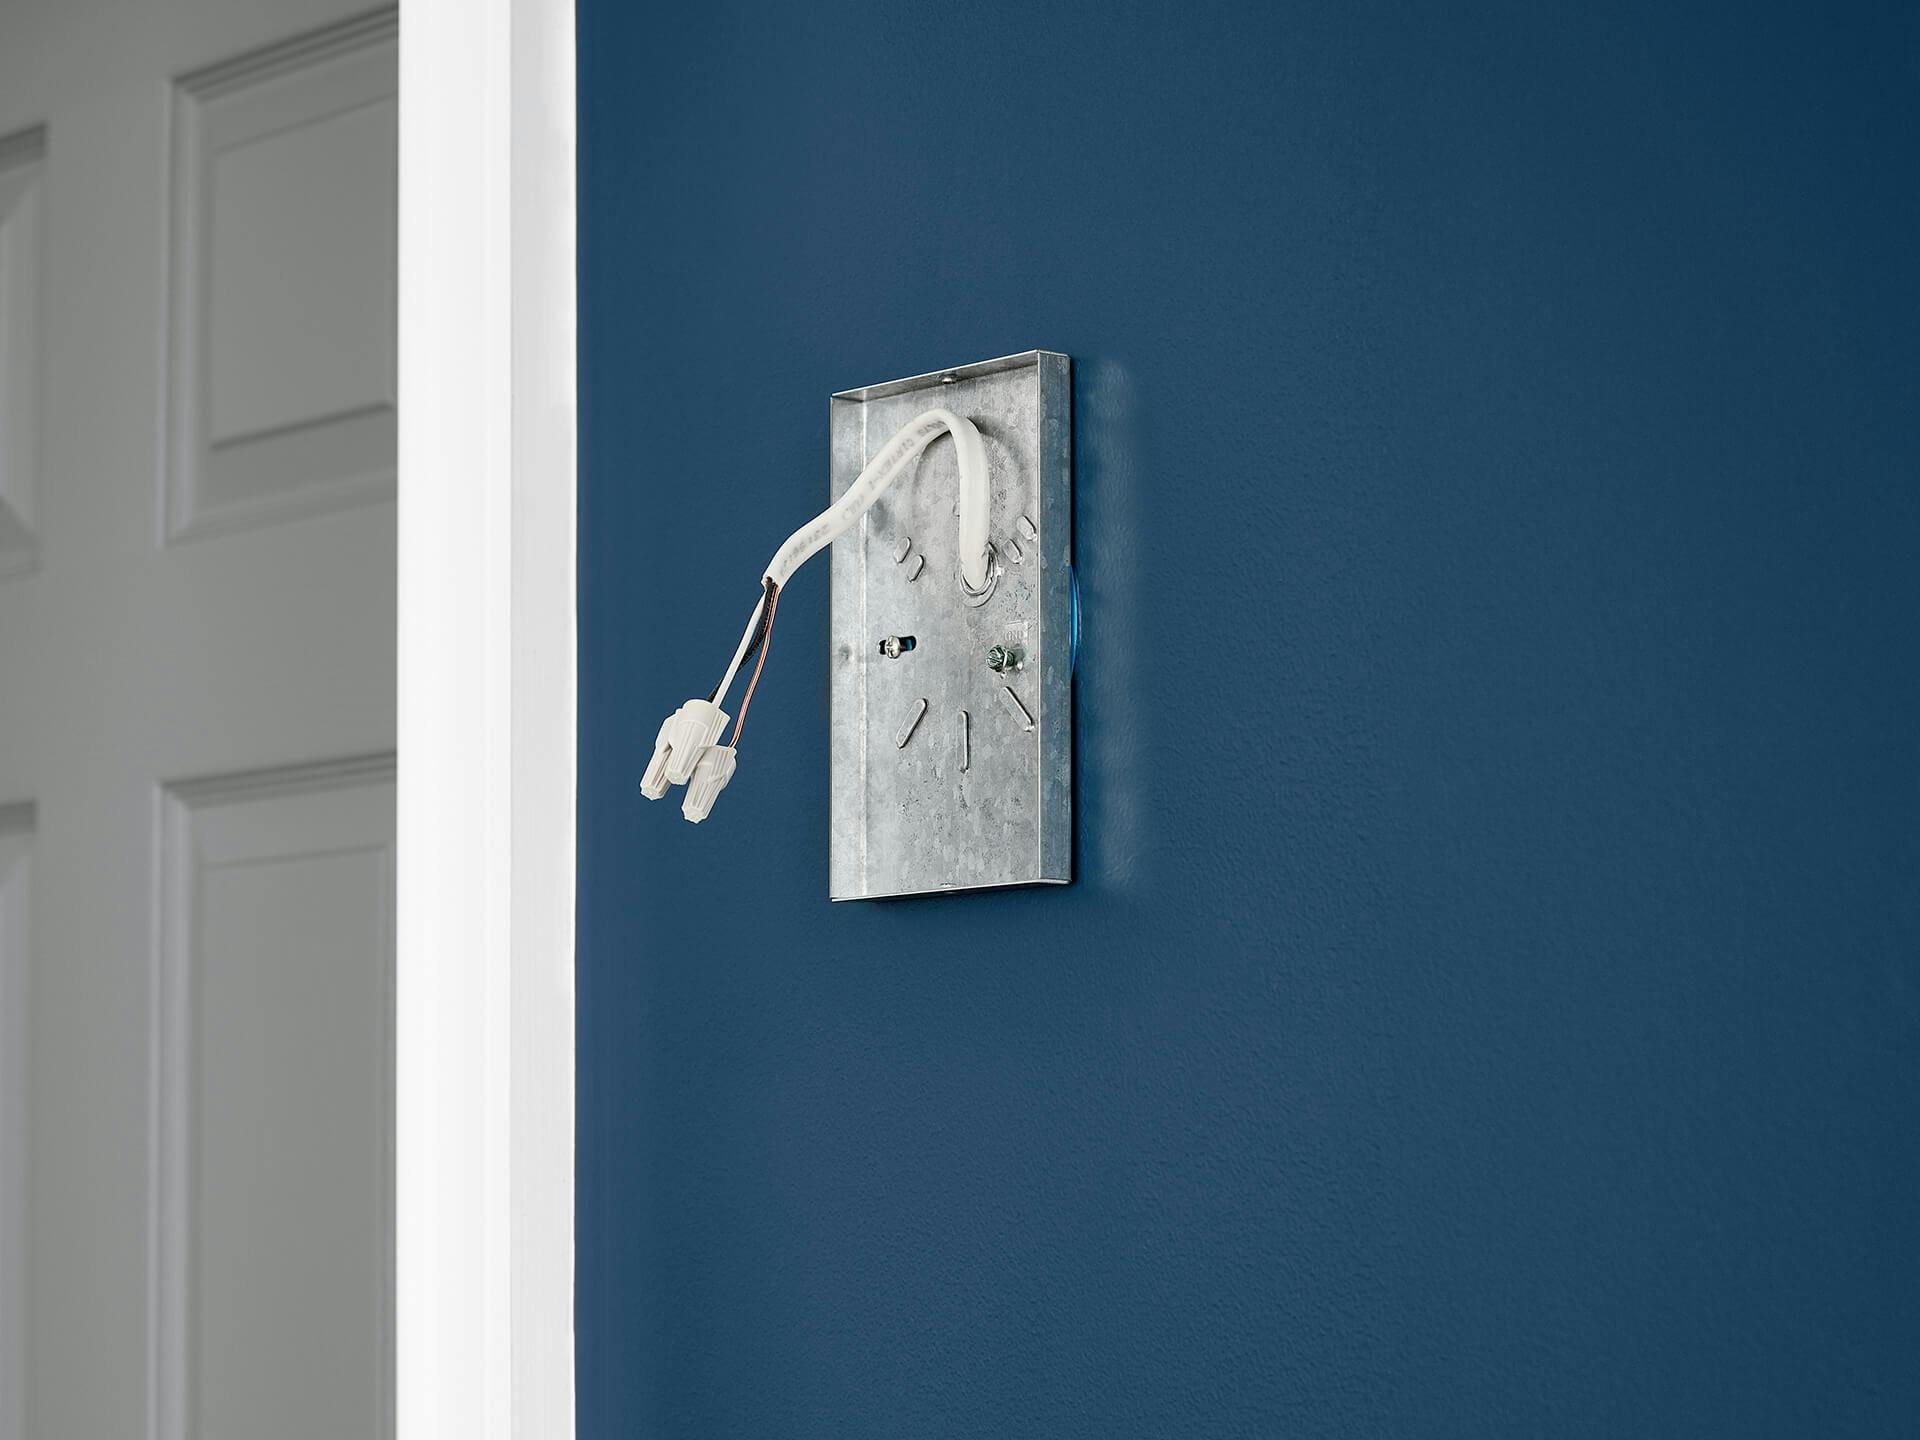 Blue wall with an example outlet box in silver and white wiring hanging loose